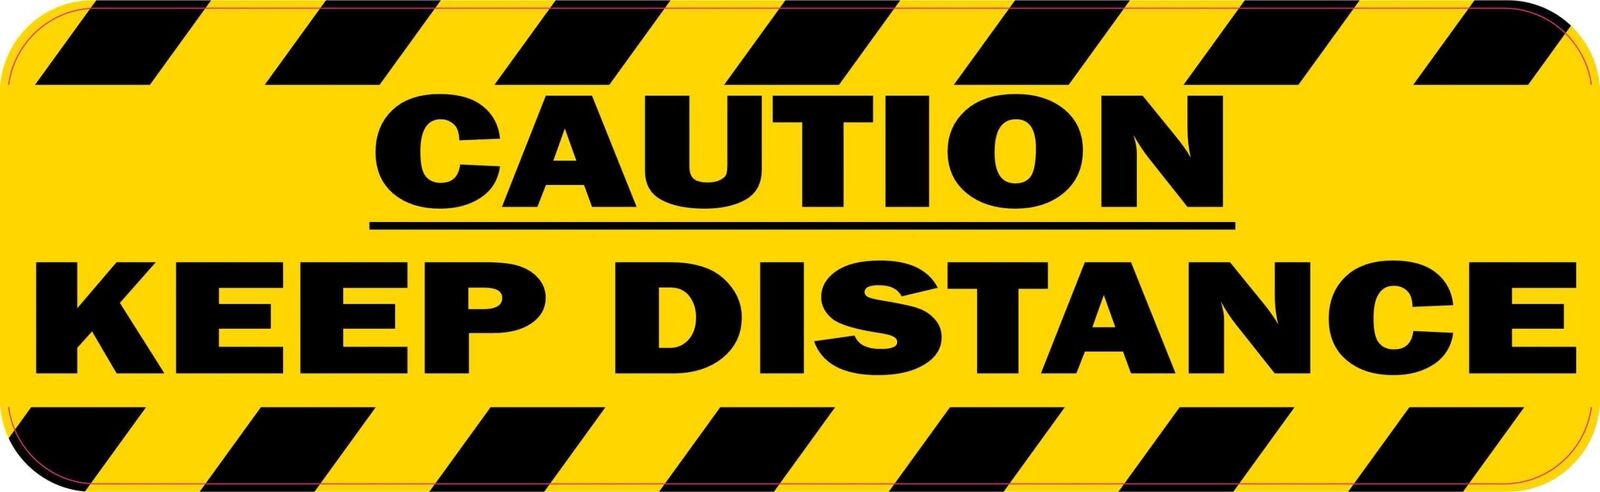 10in x 3in Caution Keep Distance Magnet Car Truck Vehicle Magnetic Sign